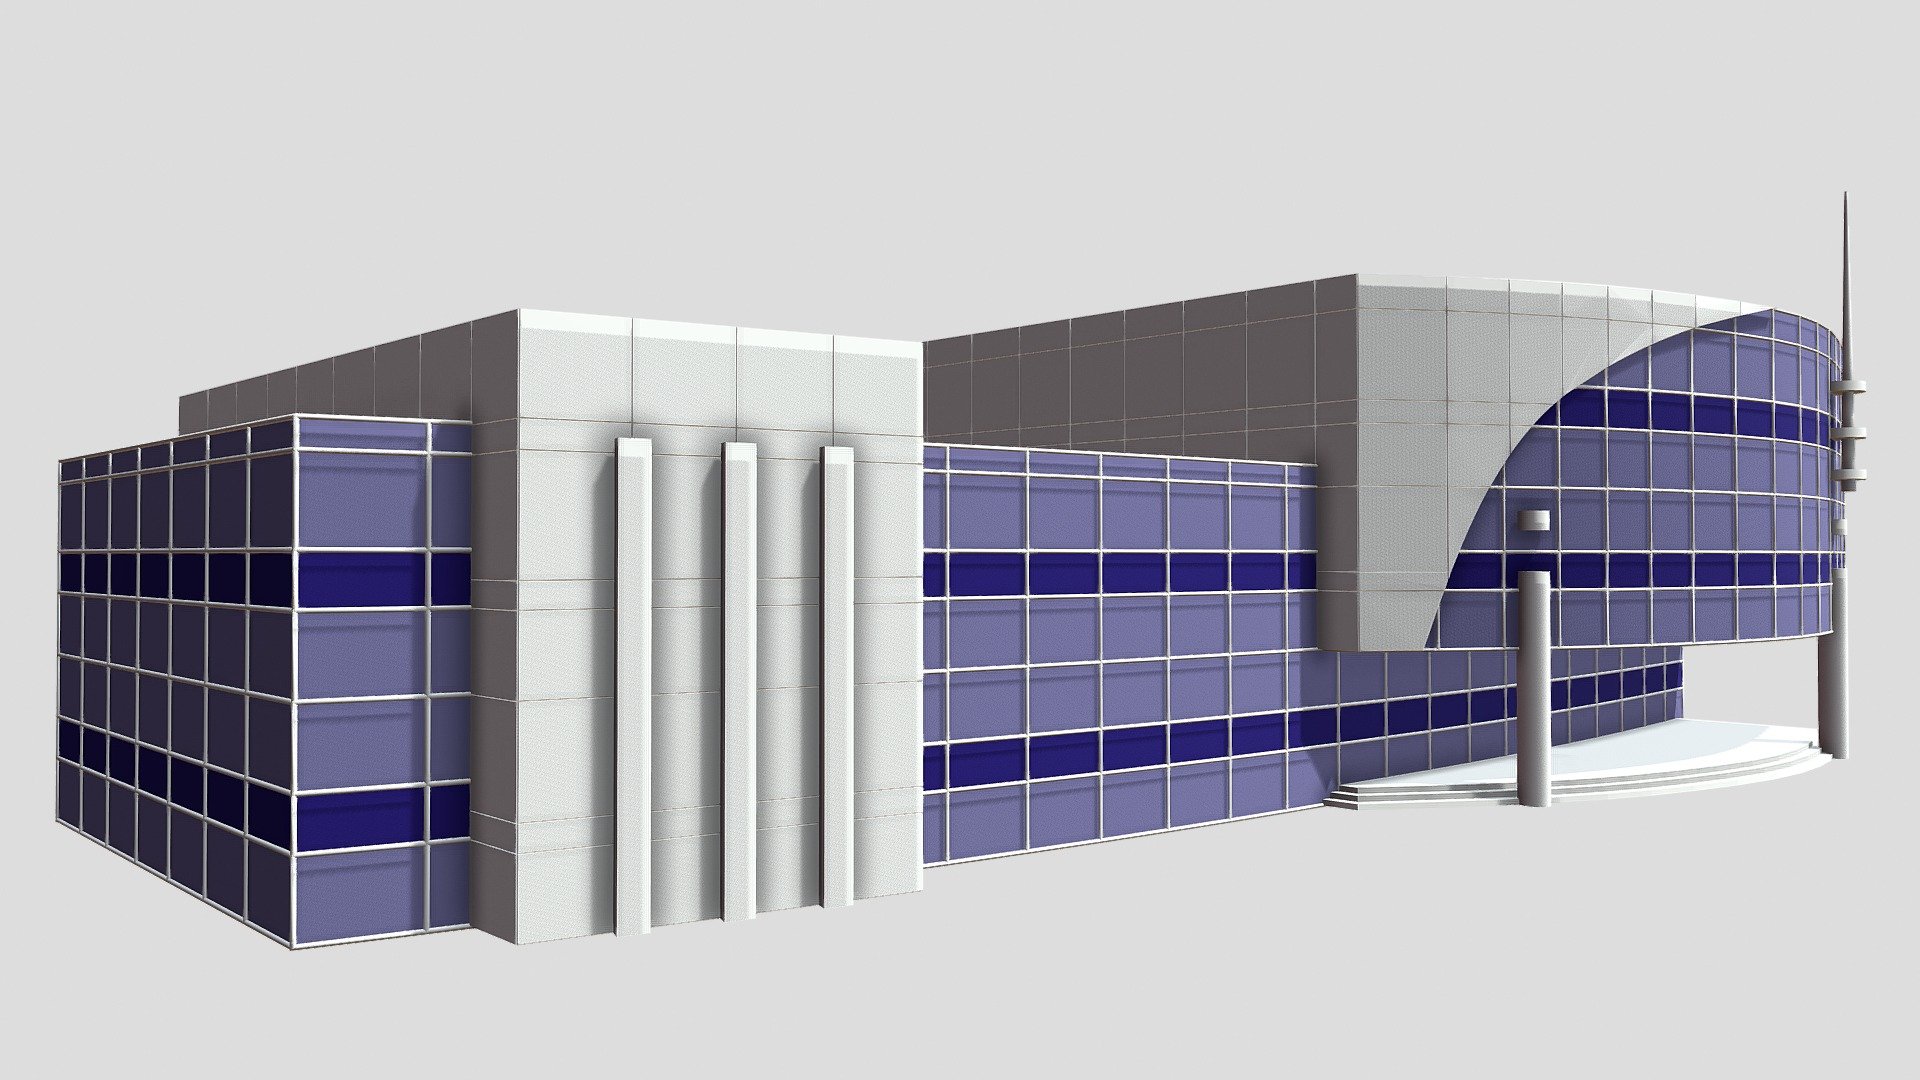 Office Building model with low poly

This is a model of a modern trading building It can be an administrative center for a company or office building or any commercial services, real-time and game use with low-poly, architecture, education 3d model